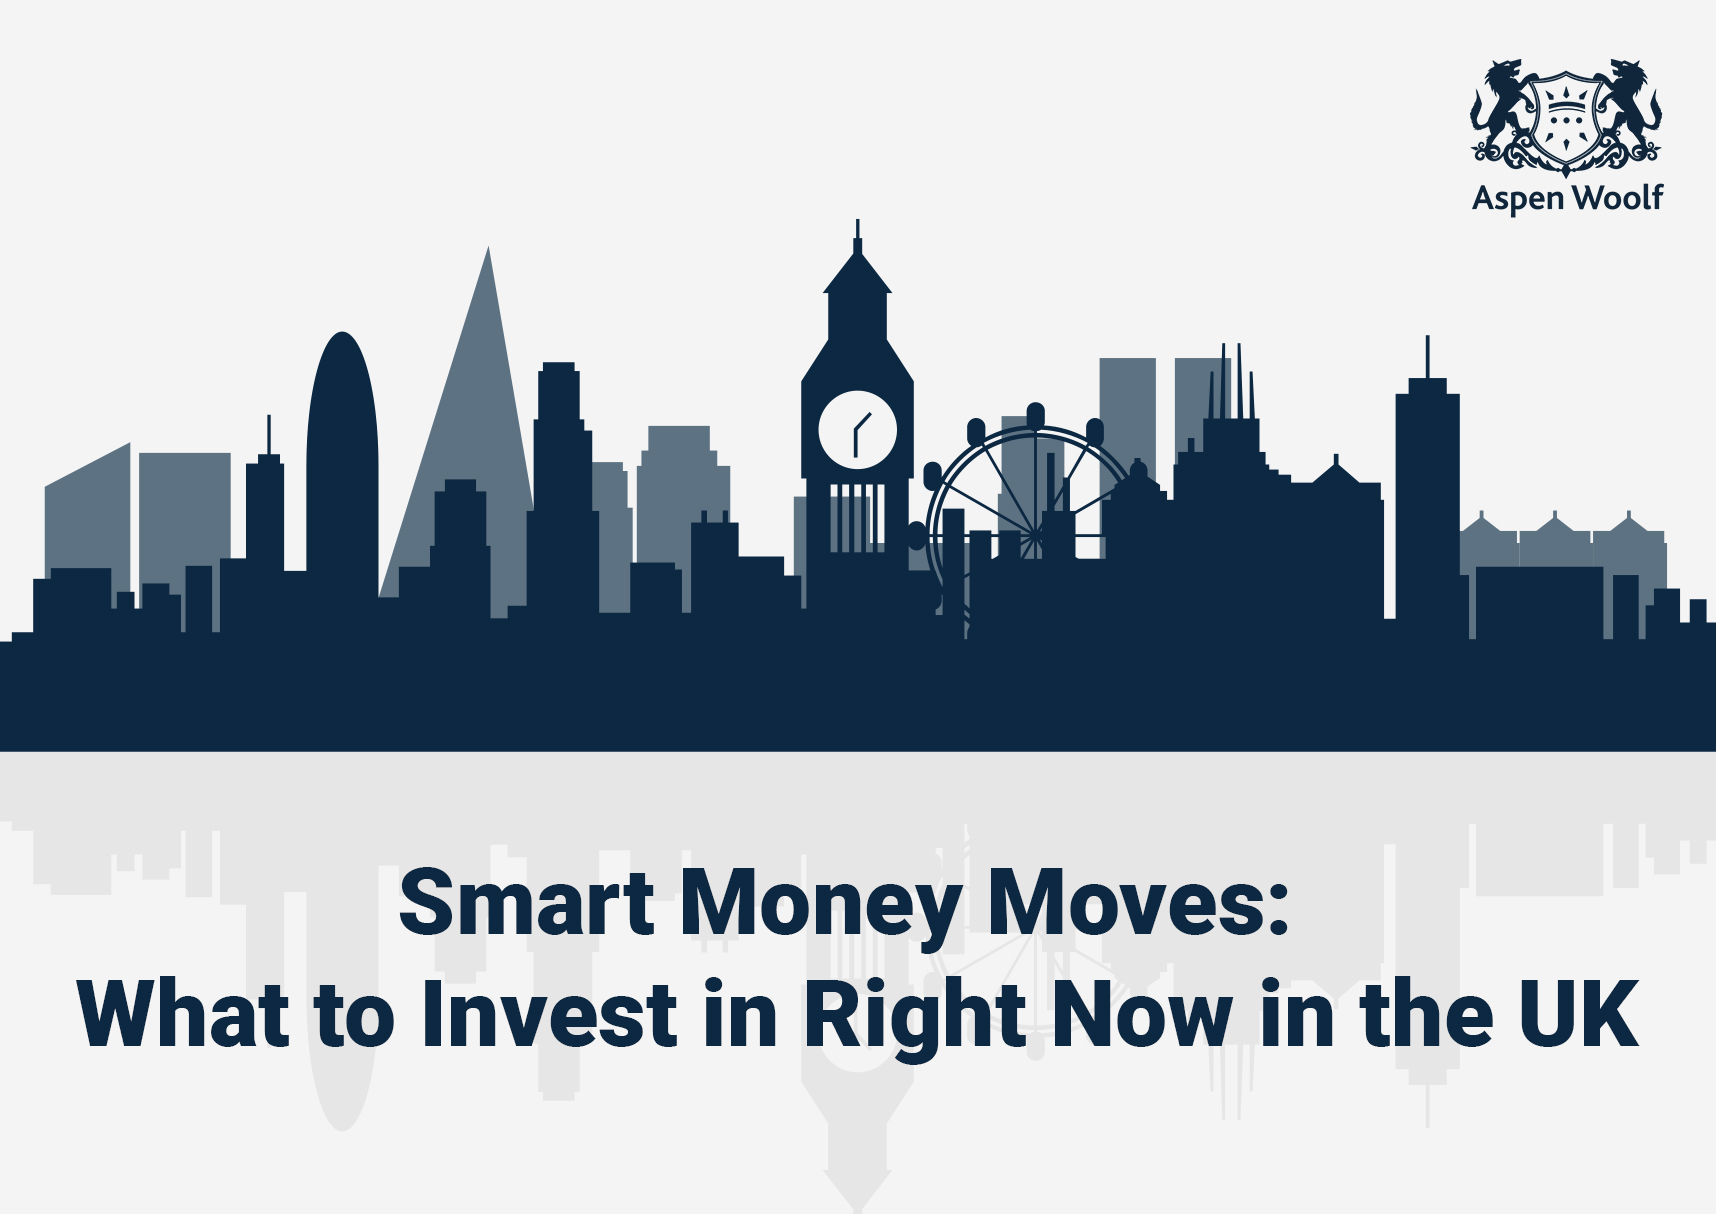 Smart Money Moves: What to Invest in Right Now in the UK